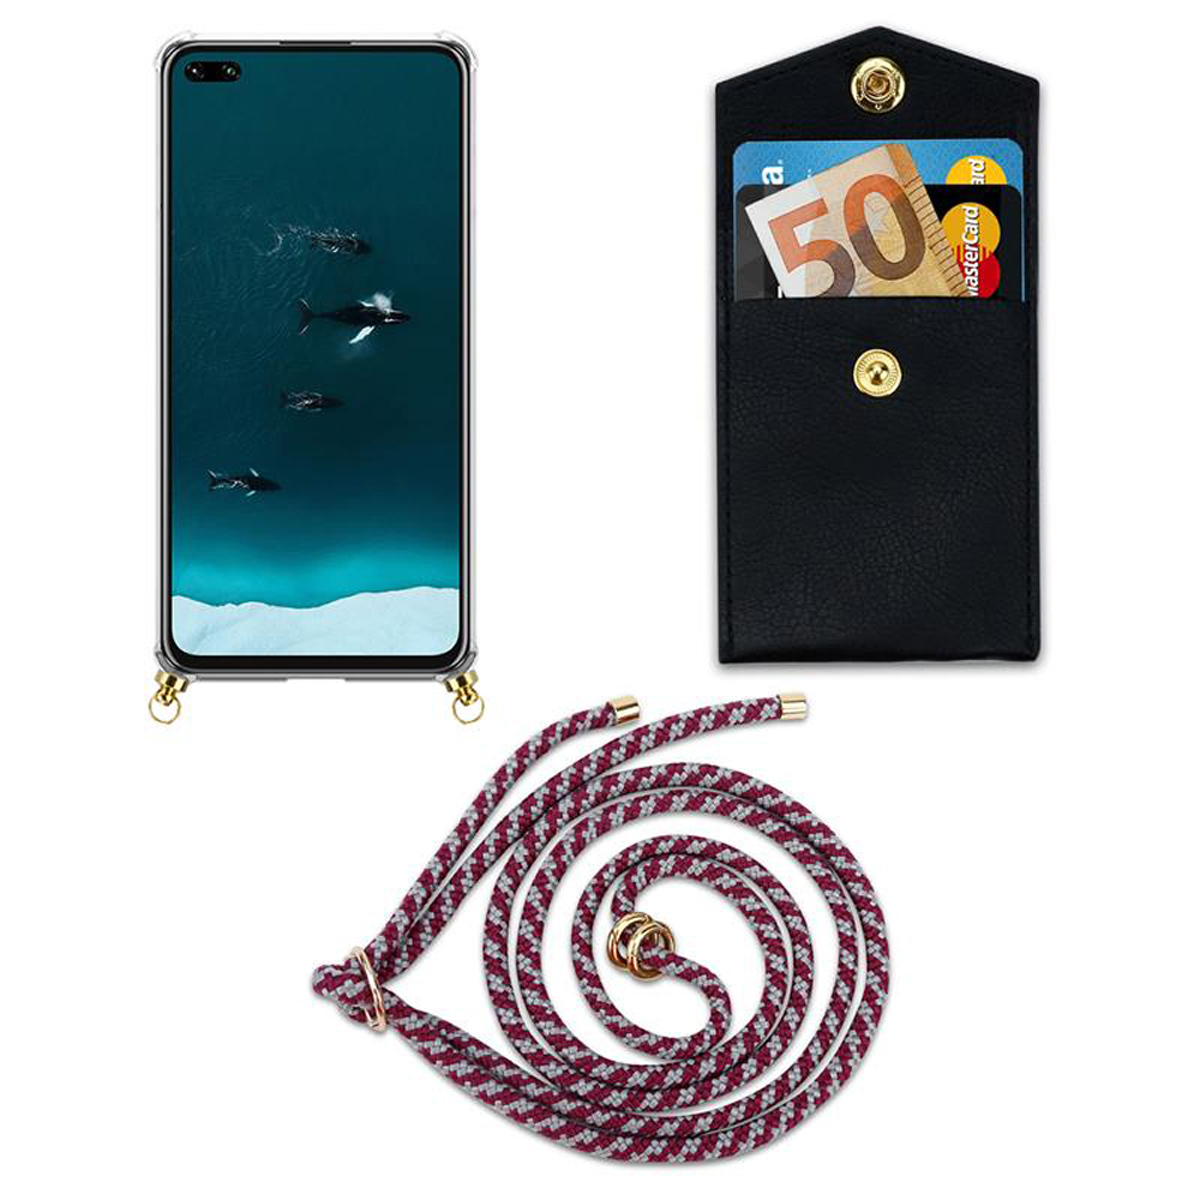 CADORABO Handy und Honor, abnehmbarer Backcover, Kette 30, View mit Ringen, Band WEIß ROT Kordel Gold Hülle